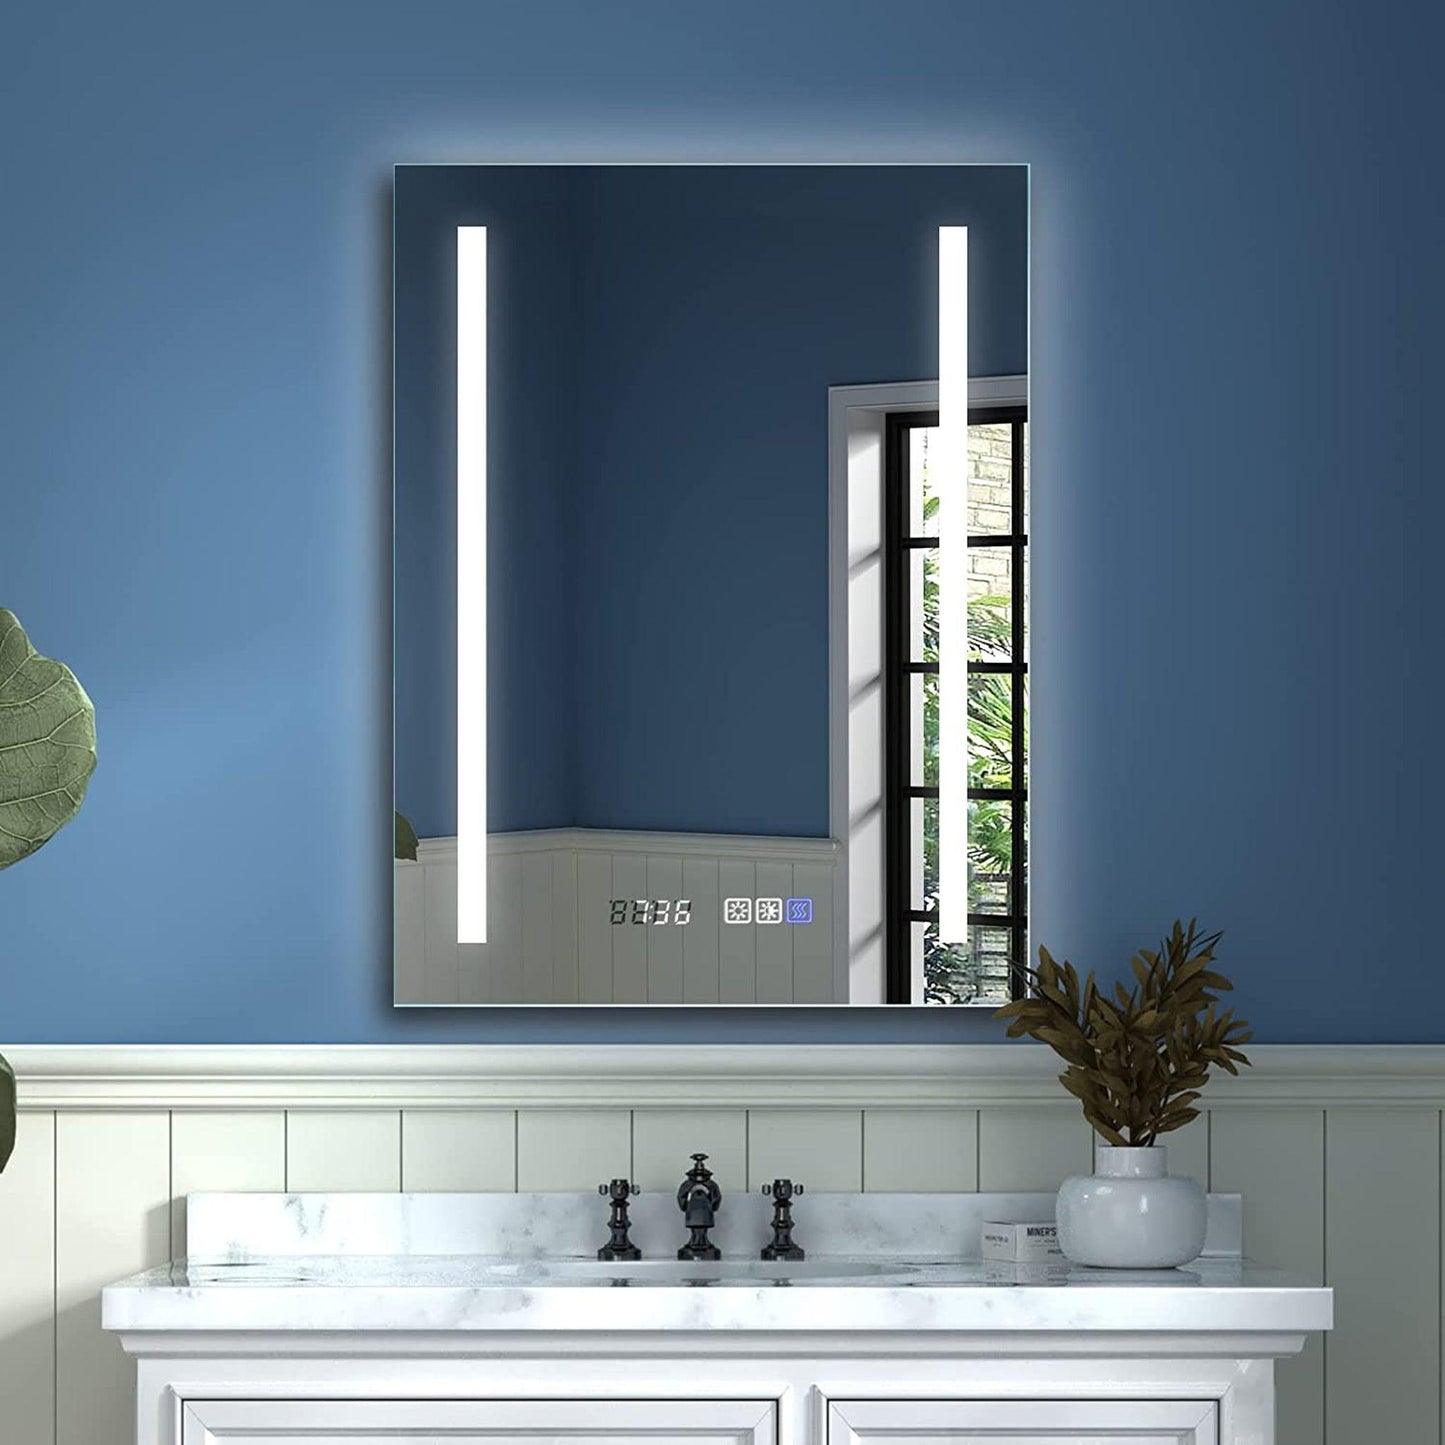 ExBrite Third Generation 24" x 32" Frameless LED Super Slim Bathroom Vanity Mirror With Clock, Night Light, Anti Fog, Dimmer, Touch Button and Waterproof IP44